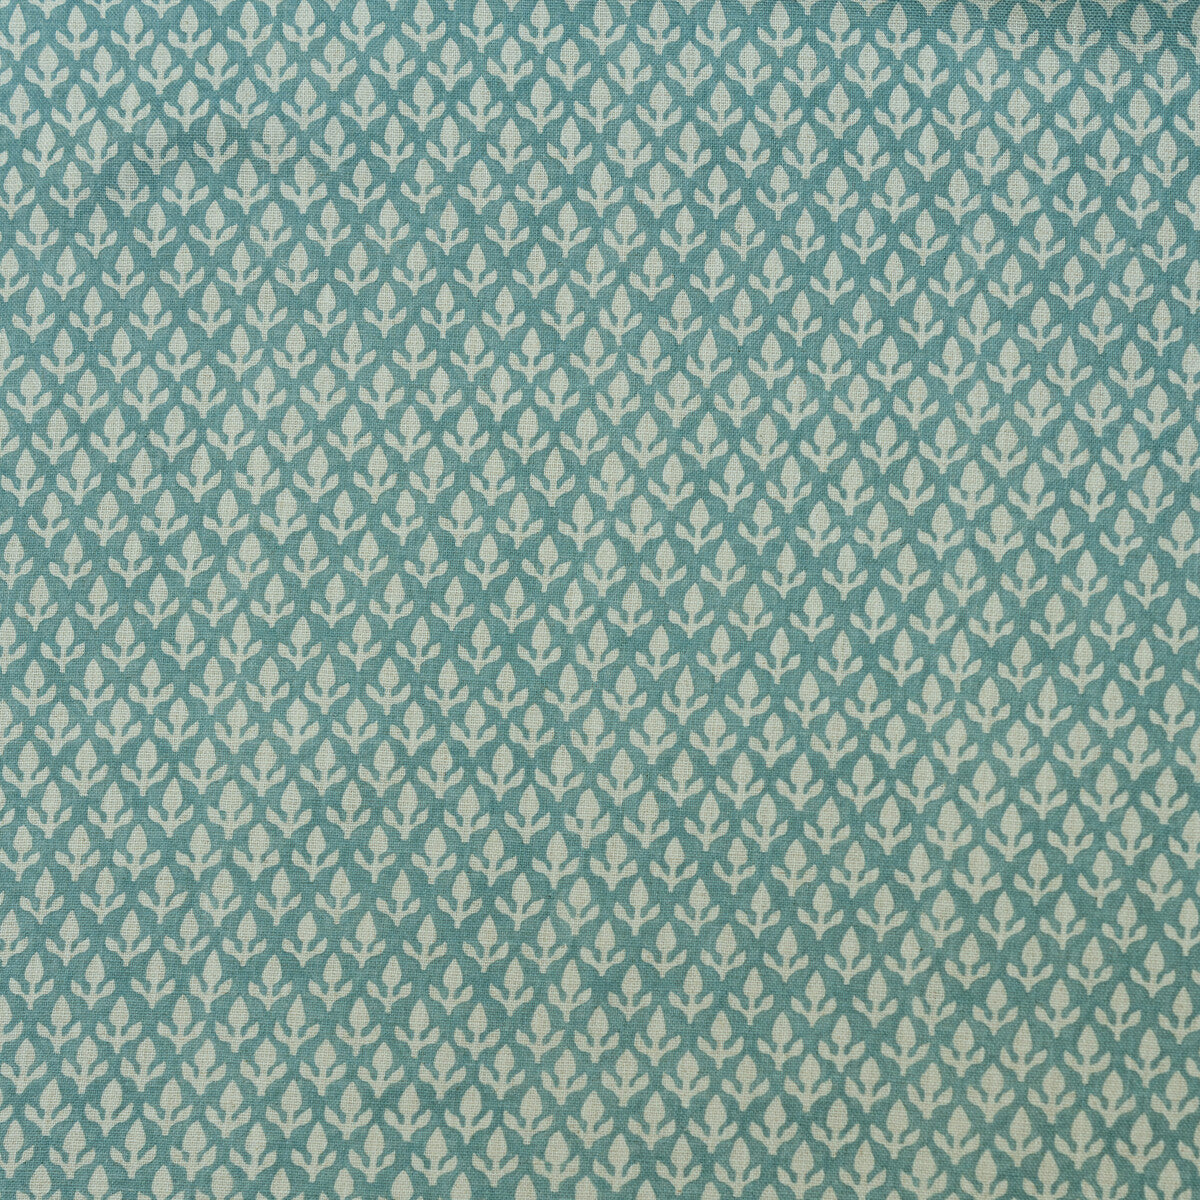 Bud fabric in turquoise color - pattern AM100379.13.0 - by Kravet Couture in the Andrew Martin Garden Path collection